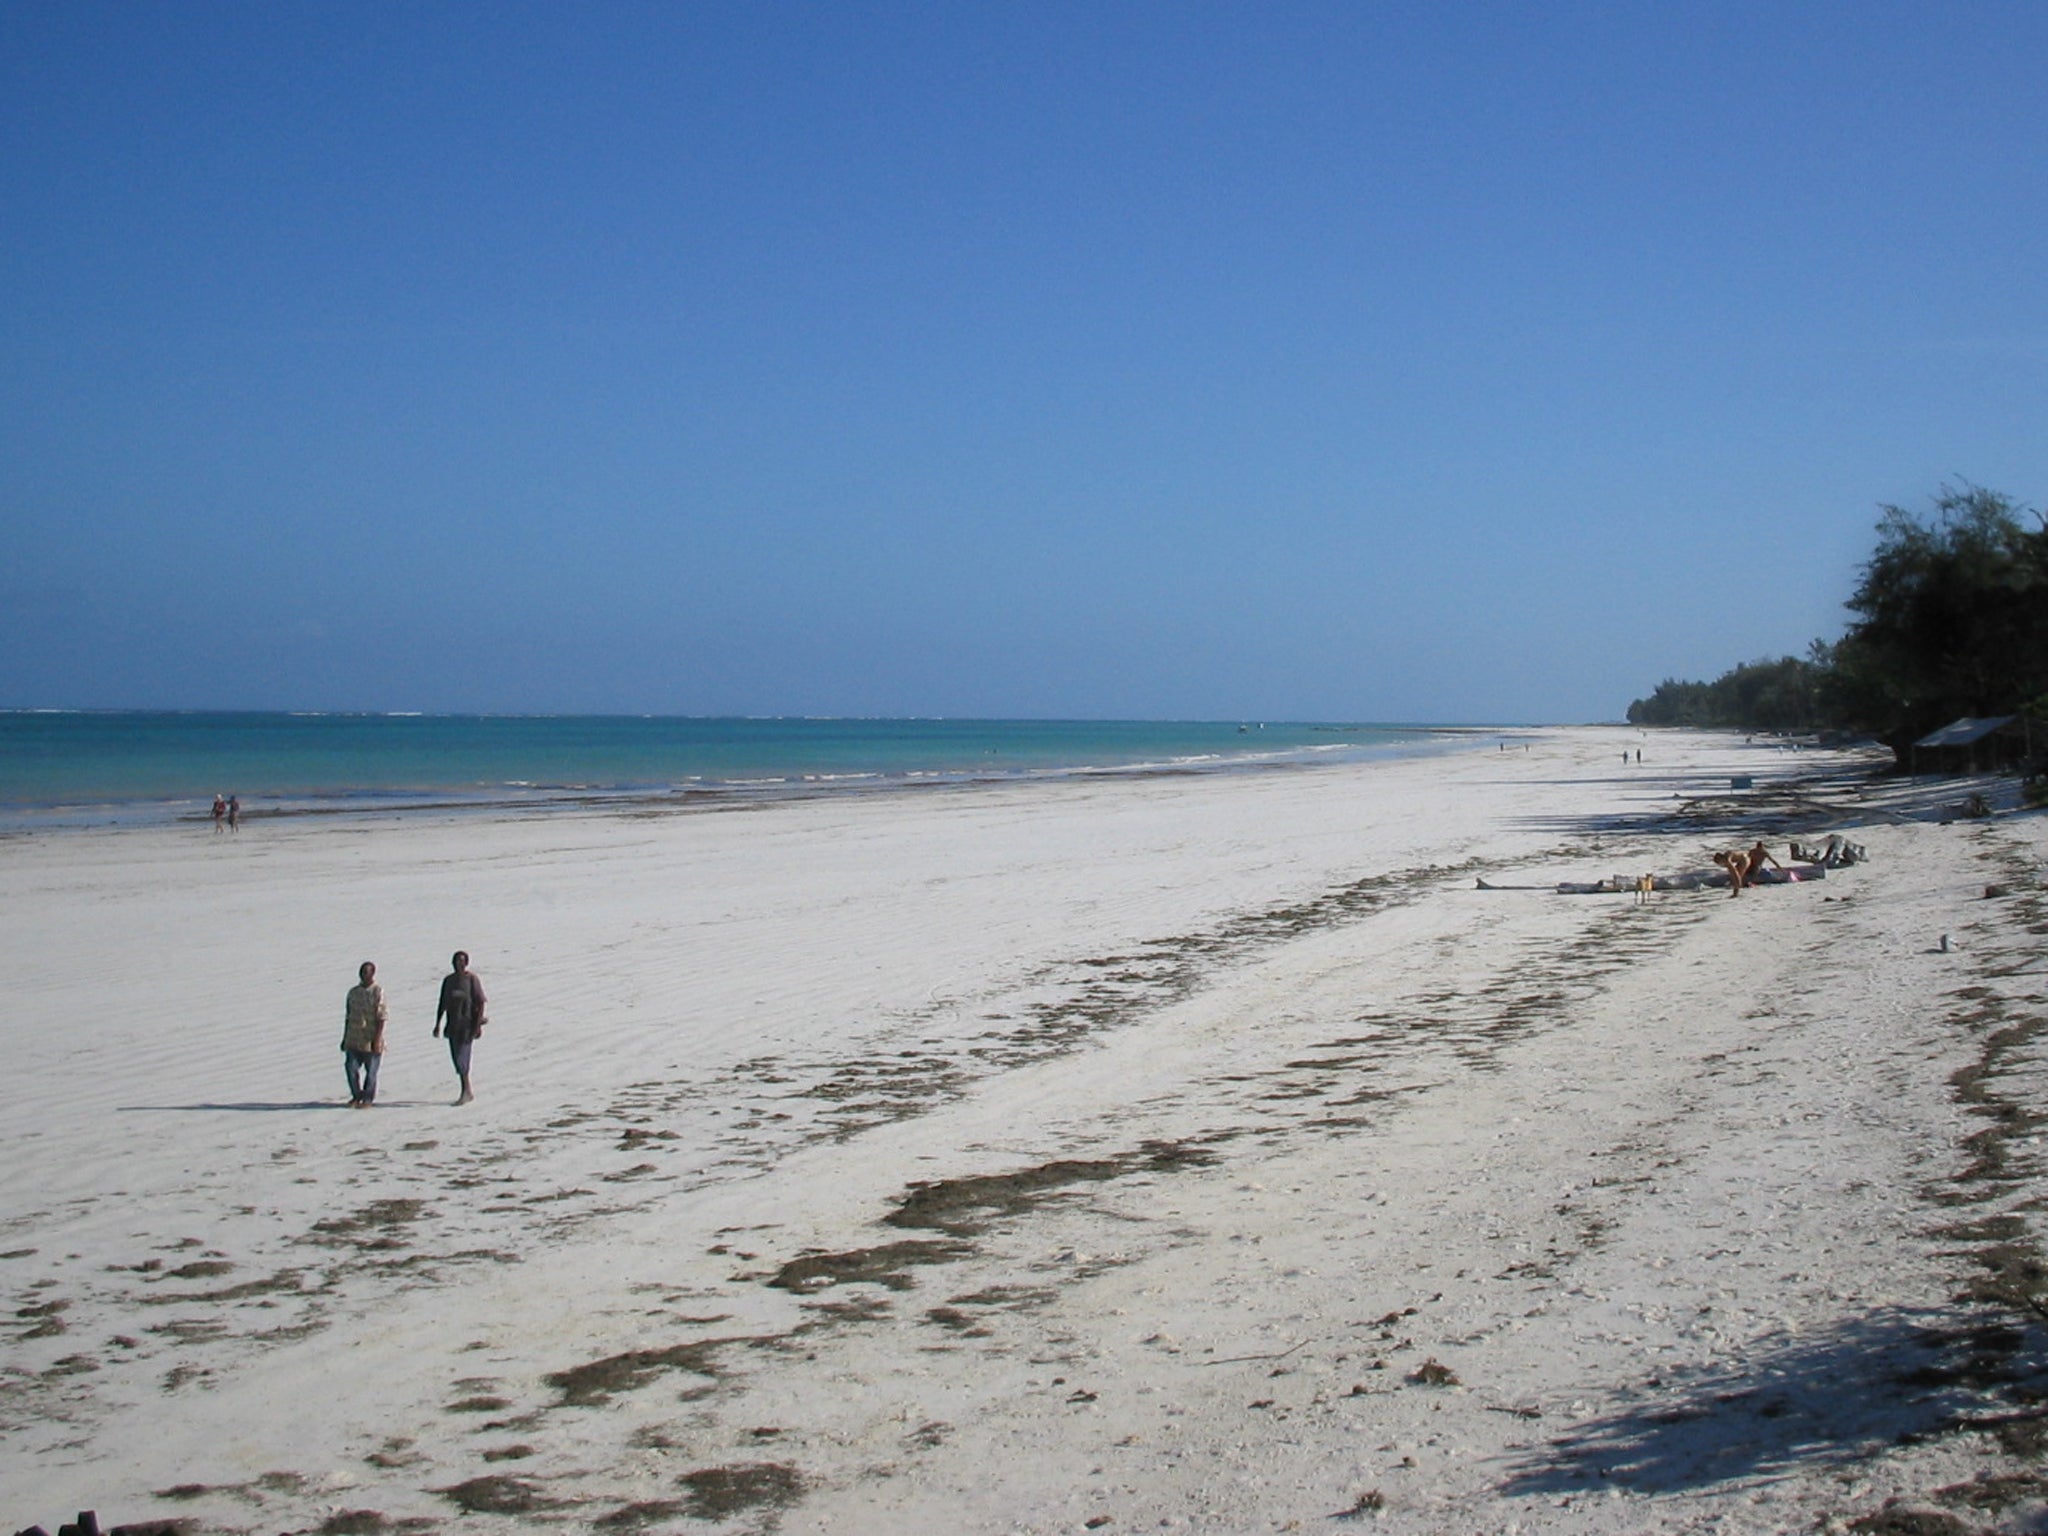 The pair are thought to have been detained in the beach resort of Diani, on the south coast of the country